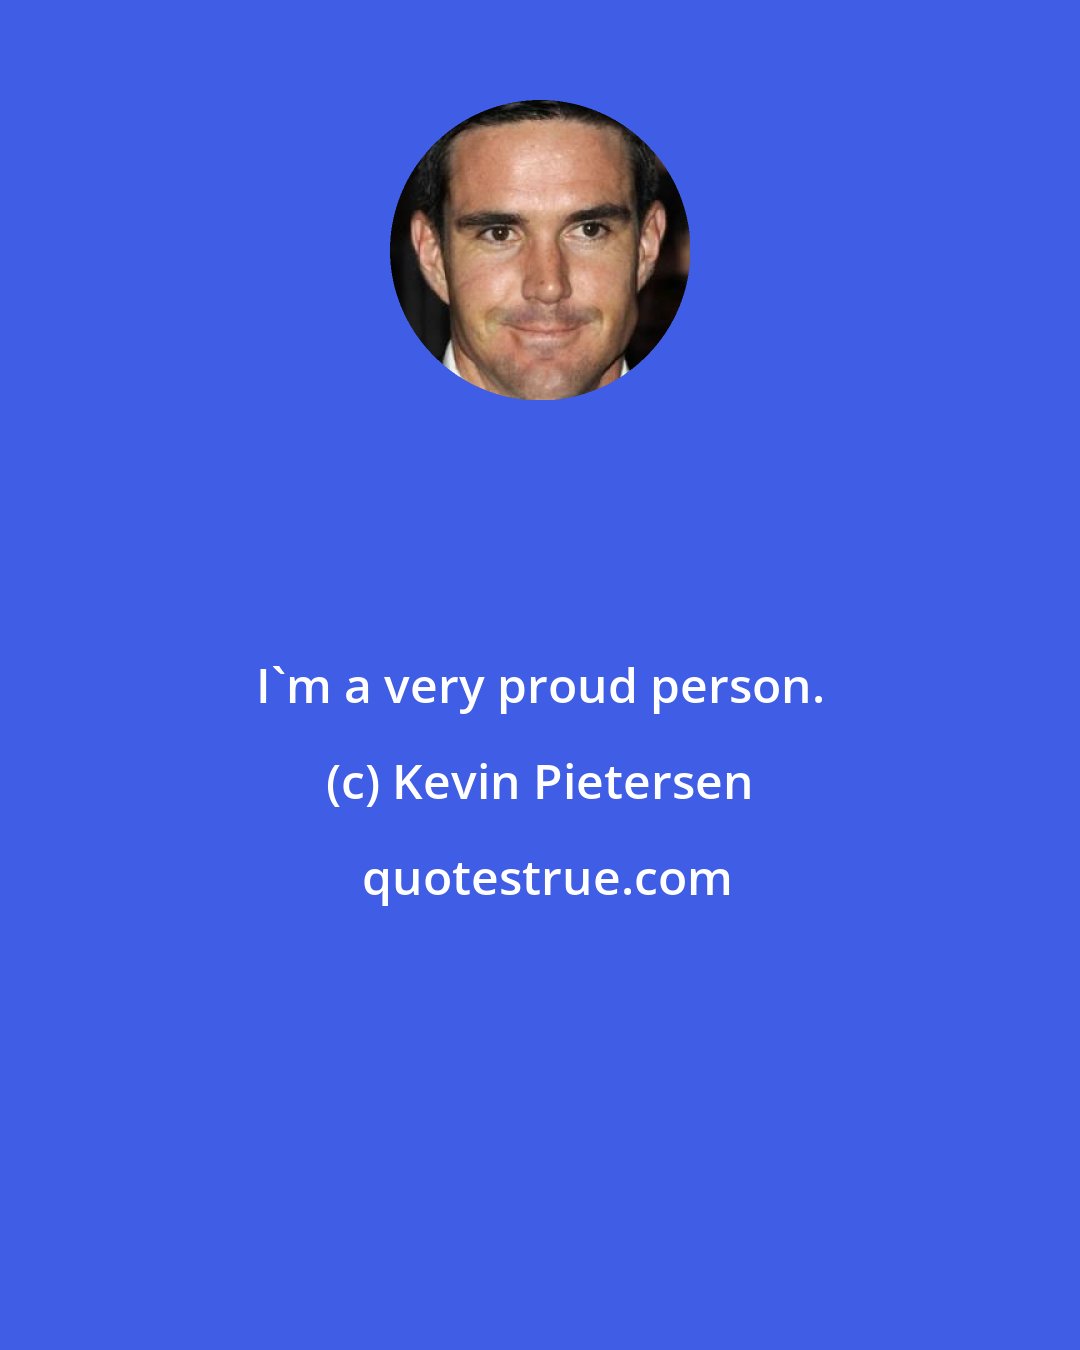 Kevin Pietersen: I'm a very proud person.